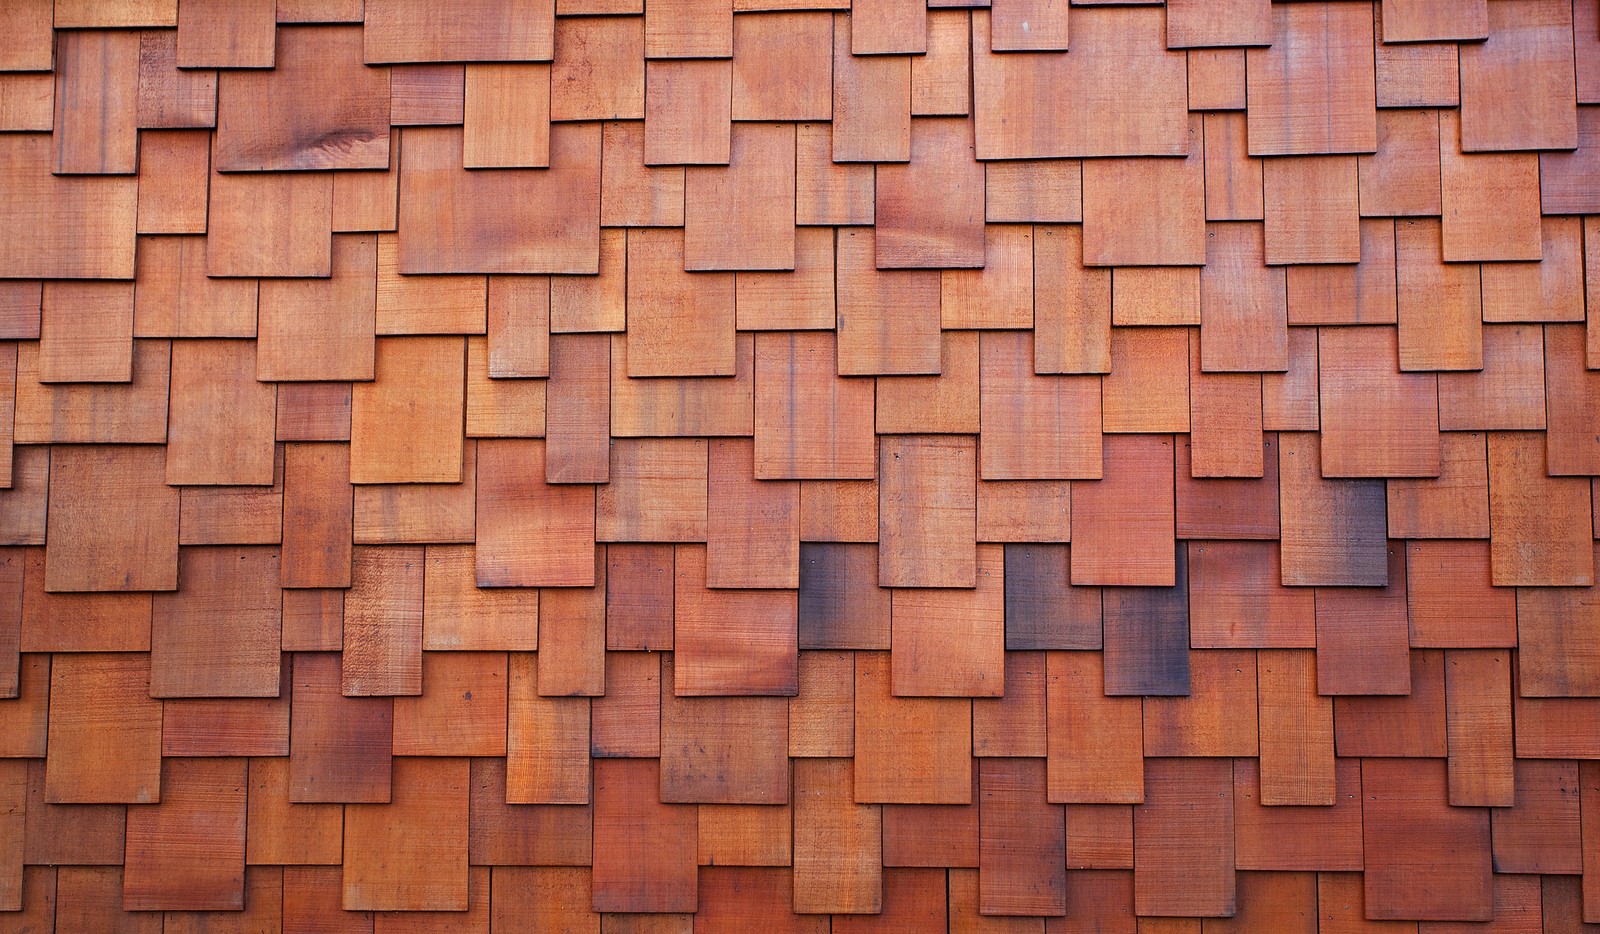 Wood Roofing